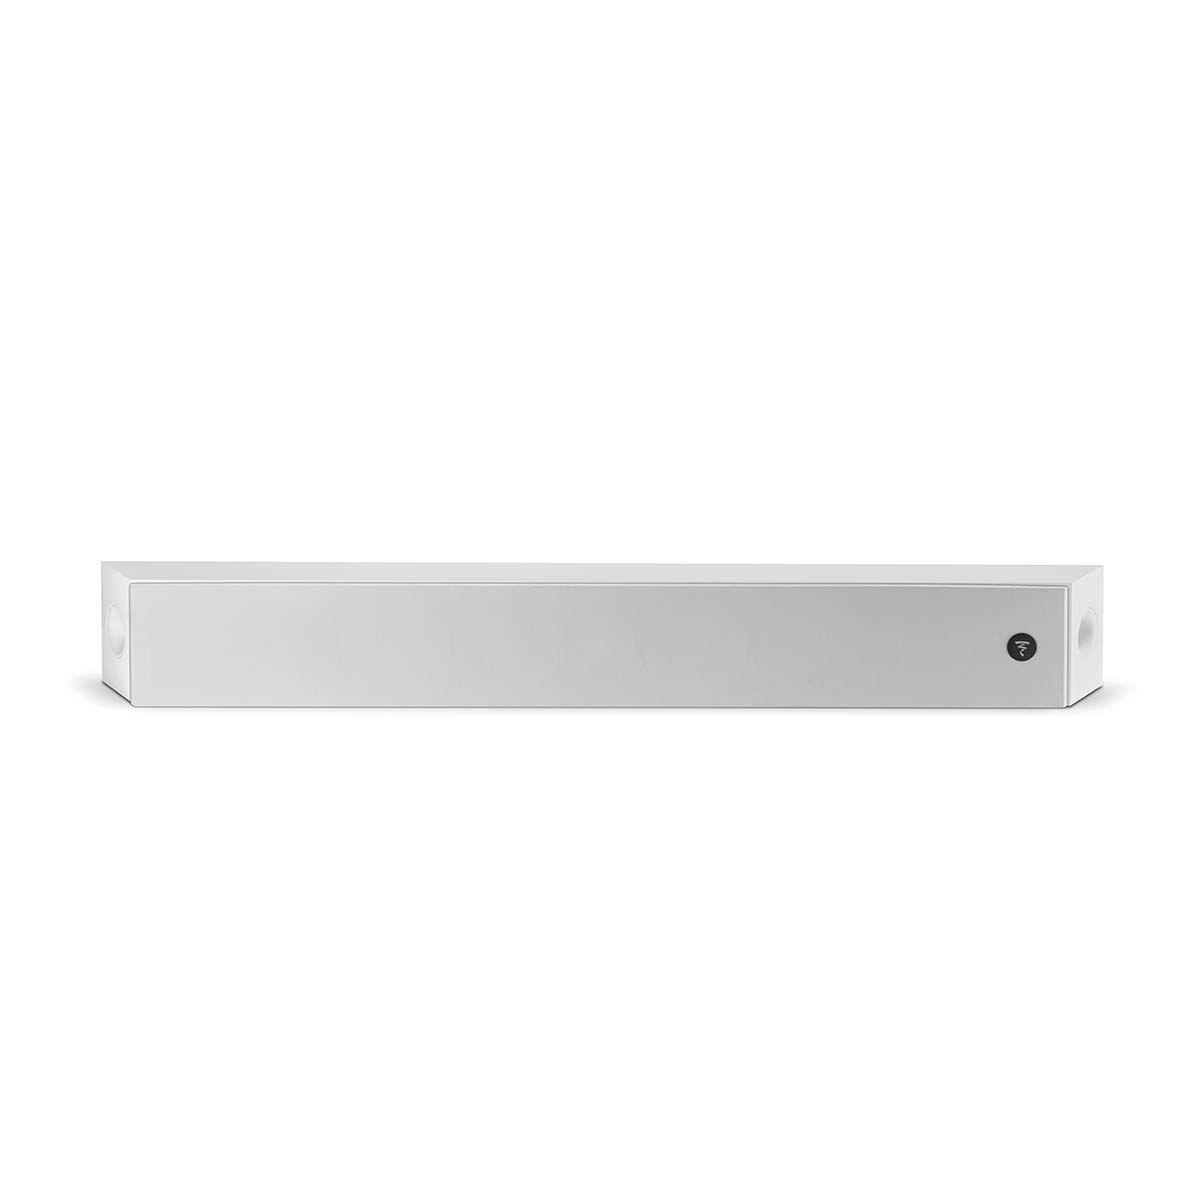 Focal On Wall 302 Speaker, Gloss White, horizontal front view with grille